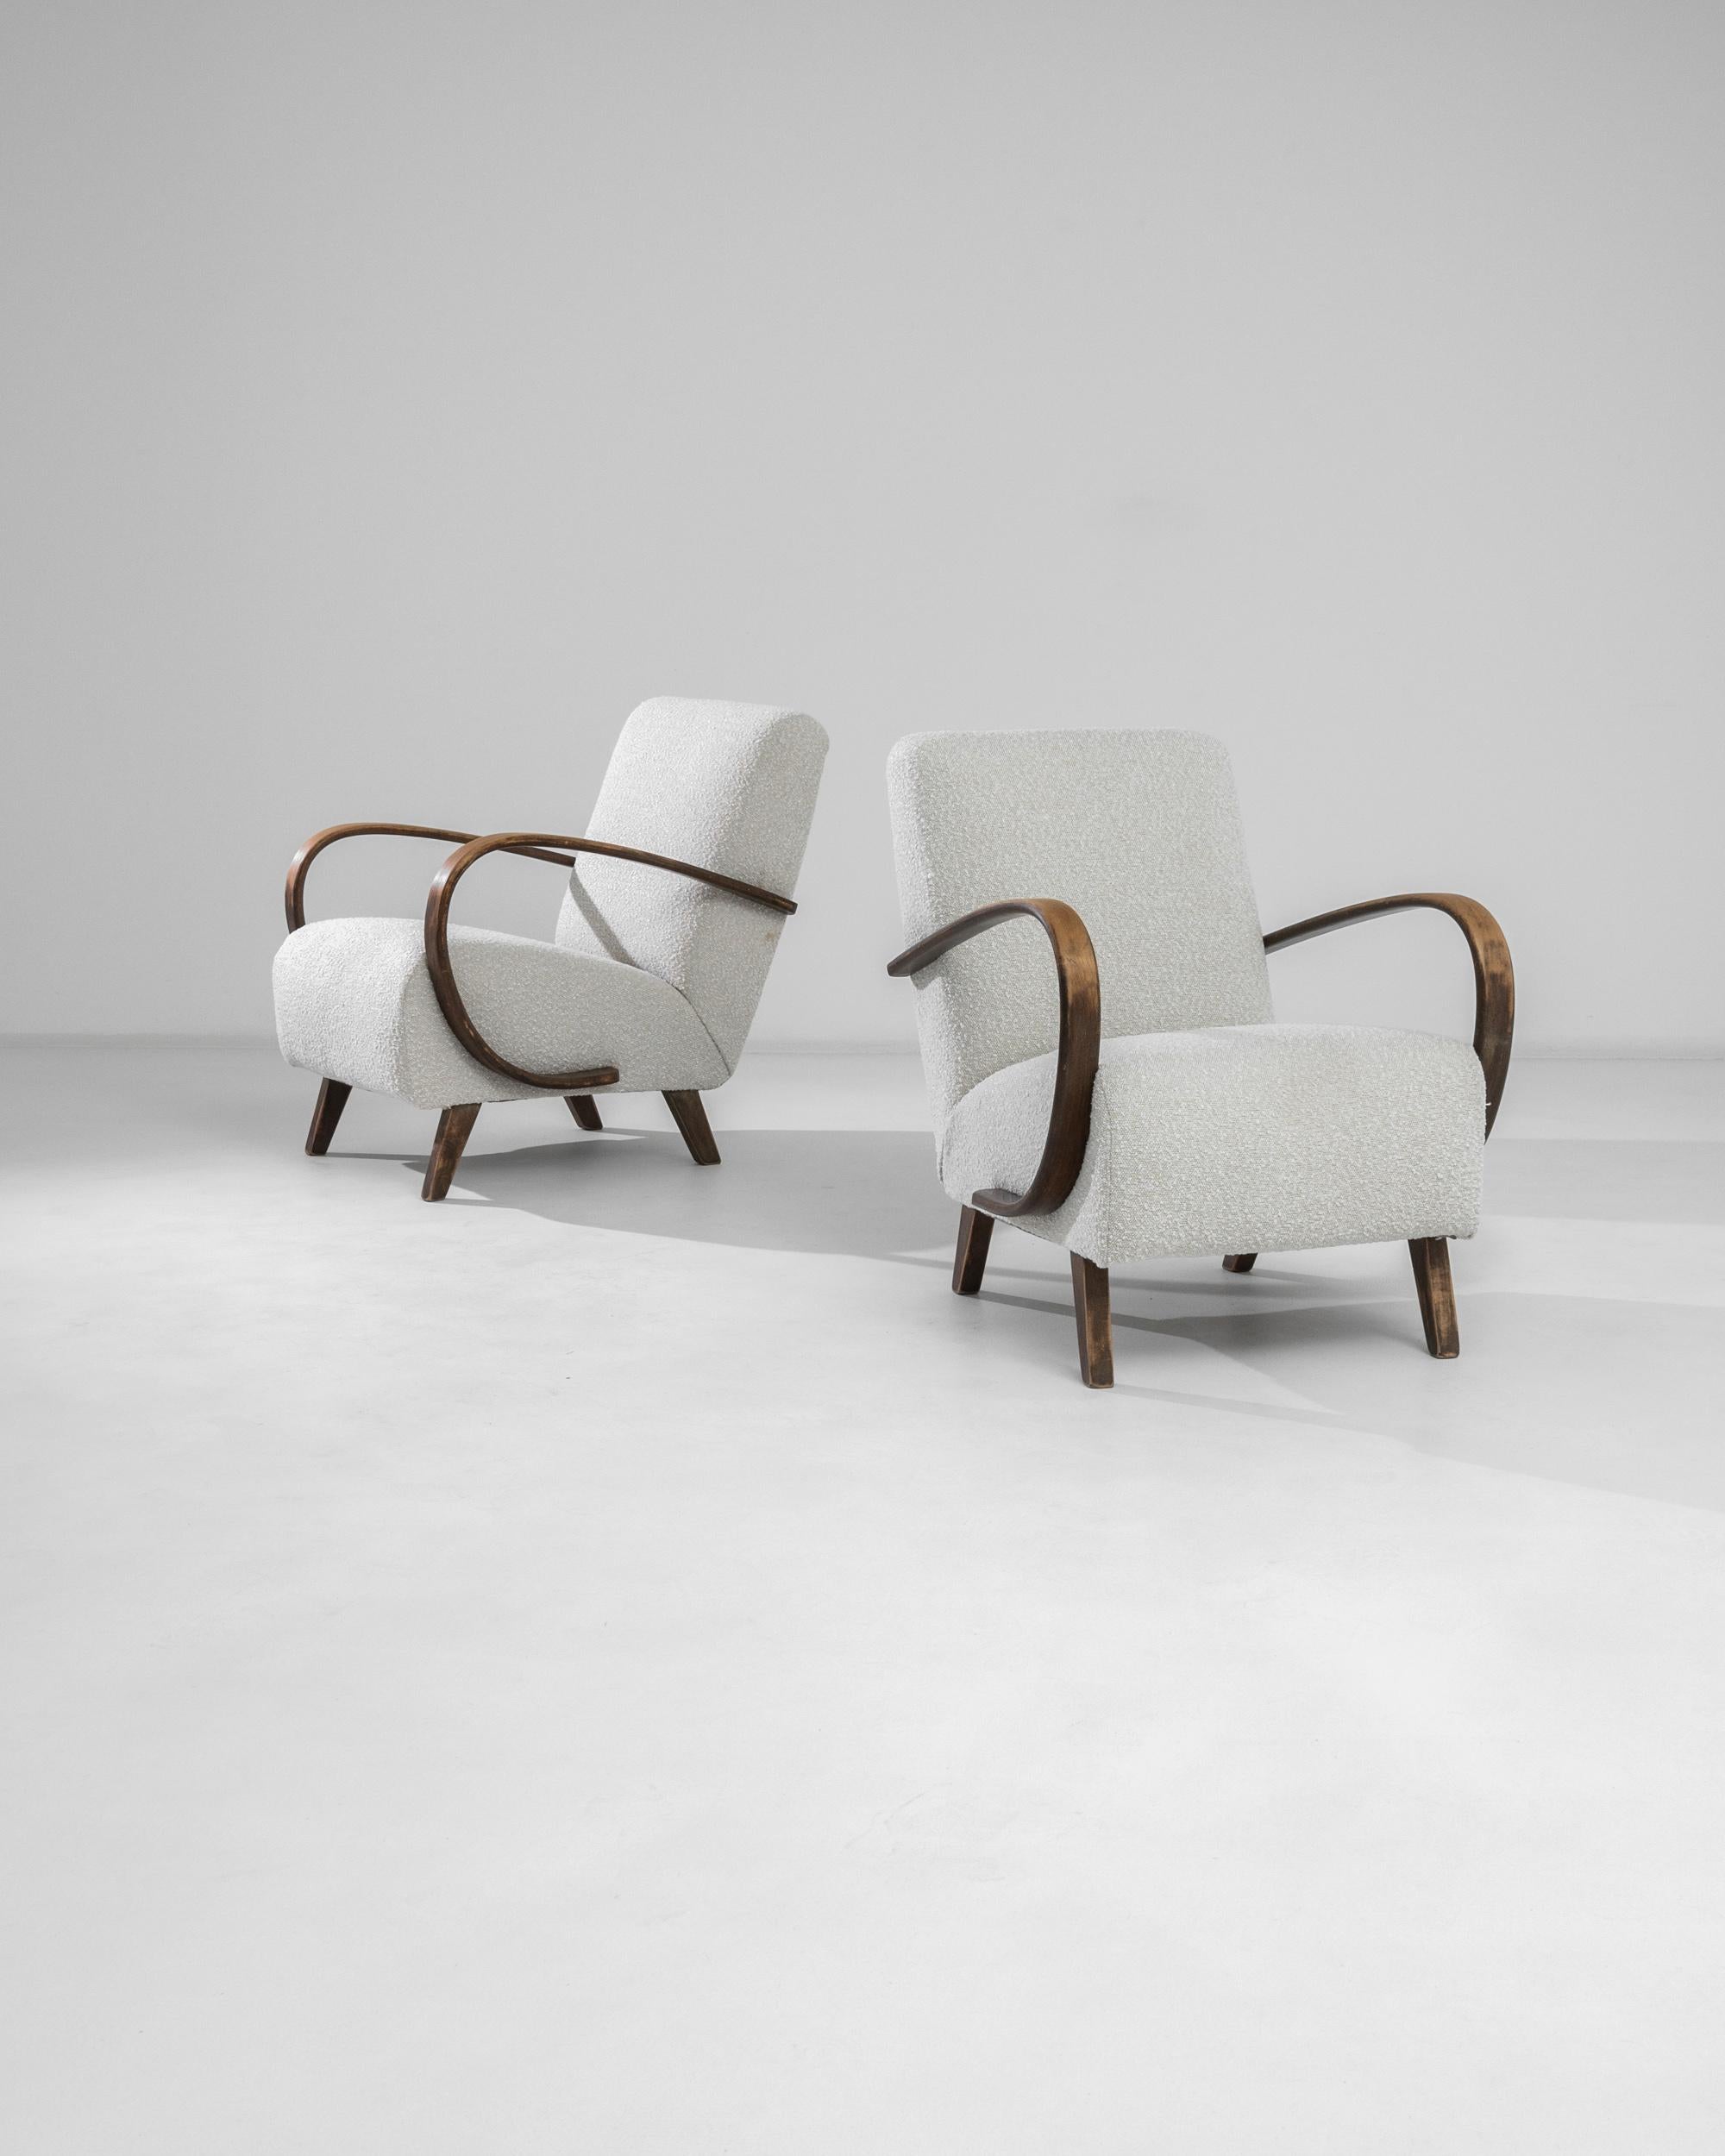 Introducing a pair of stunning 1950s Czech wooden chairs, a testament to the era's design innovation and style. These chairs exude a chic mid-century modern appeal, with their smooth, curving wooden armrests that provide a warm, natural contrast to